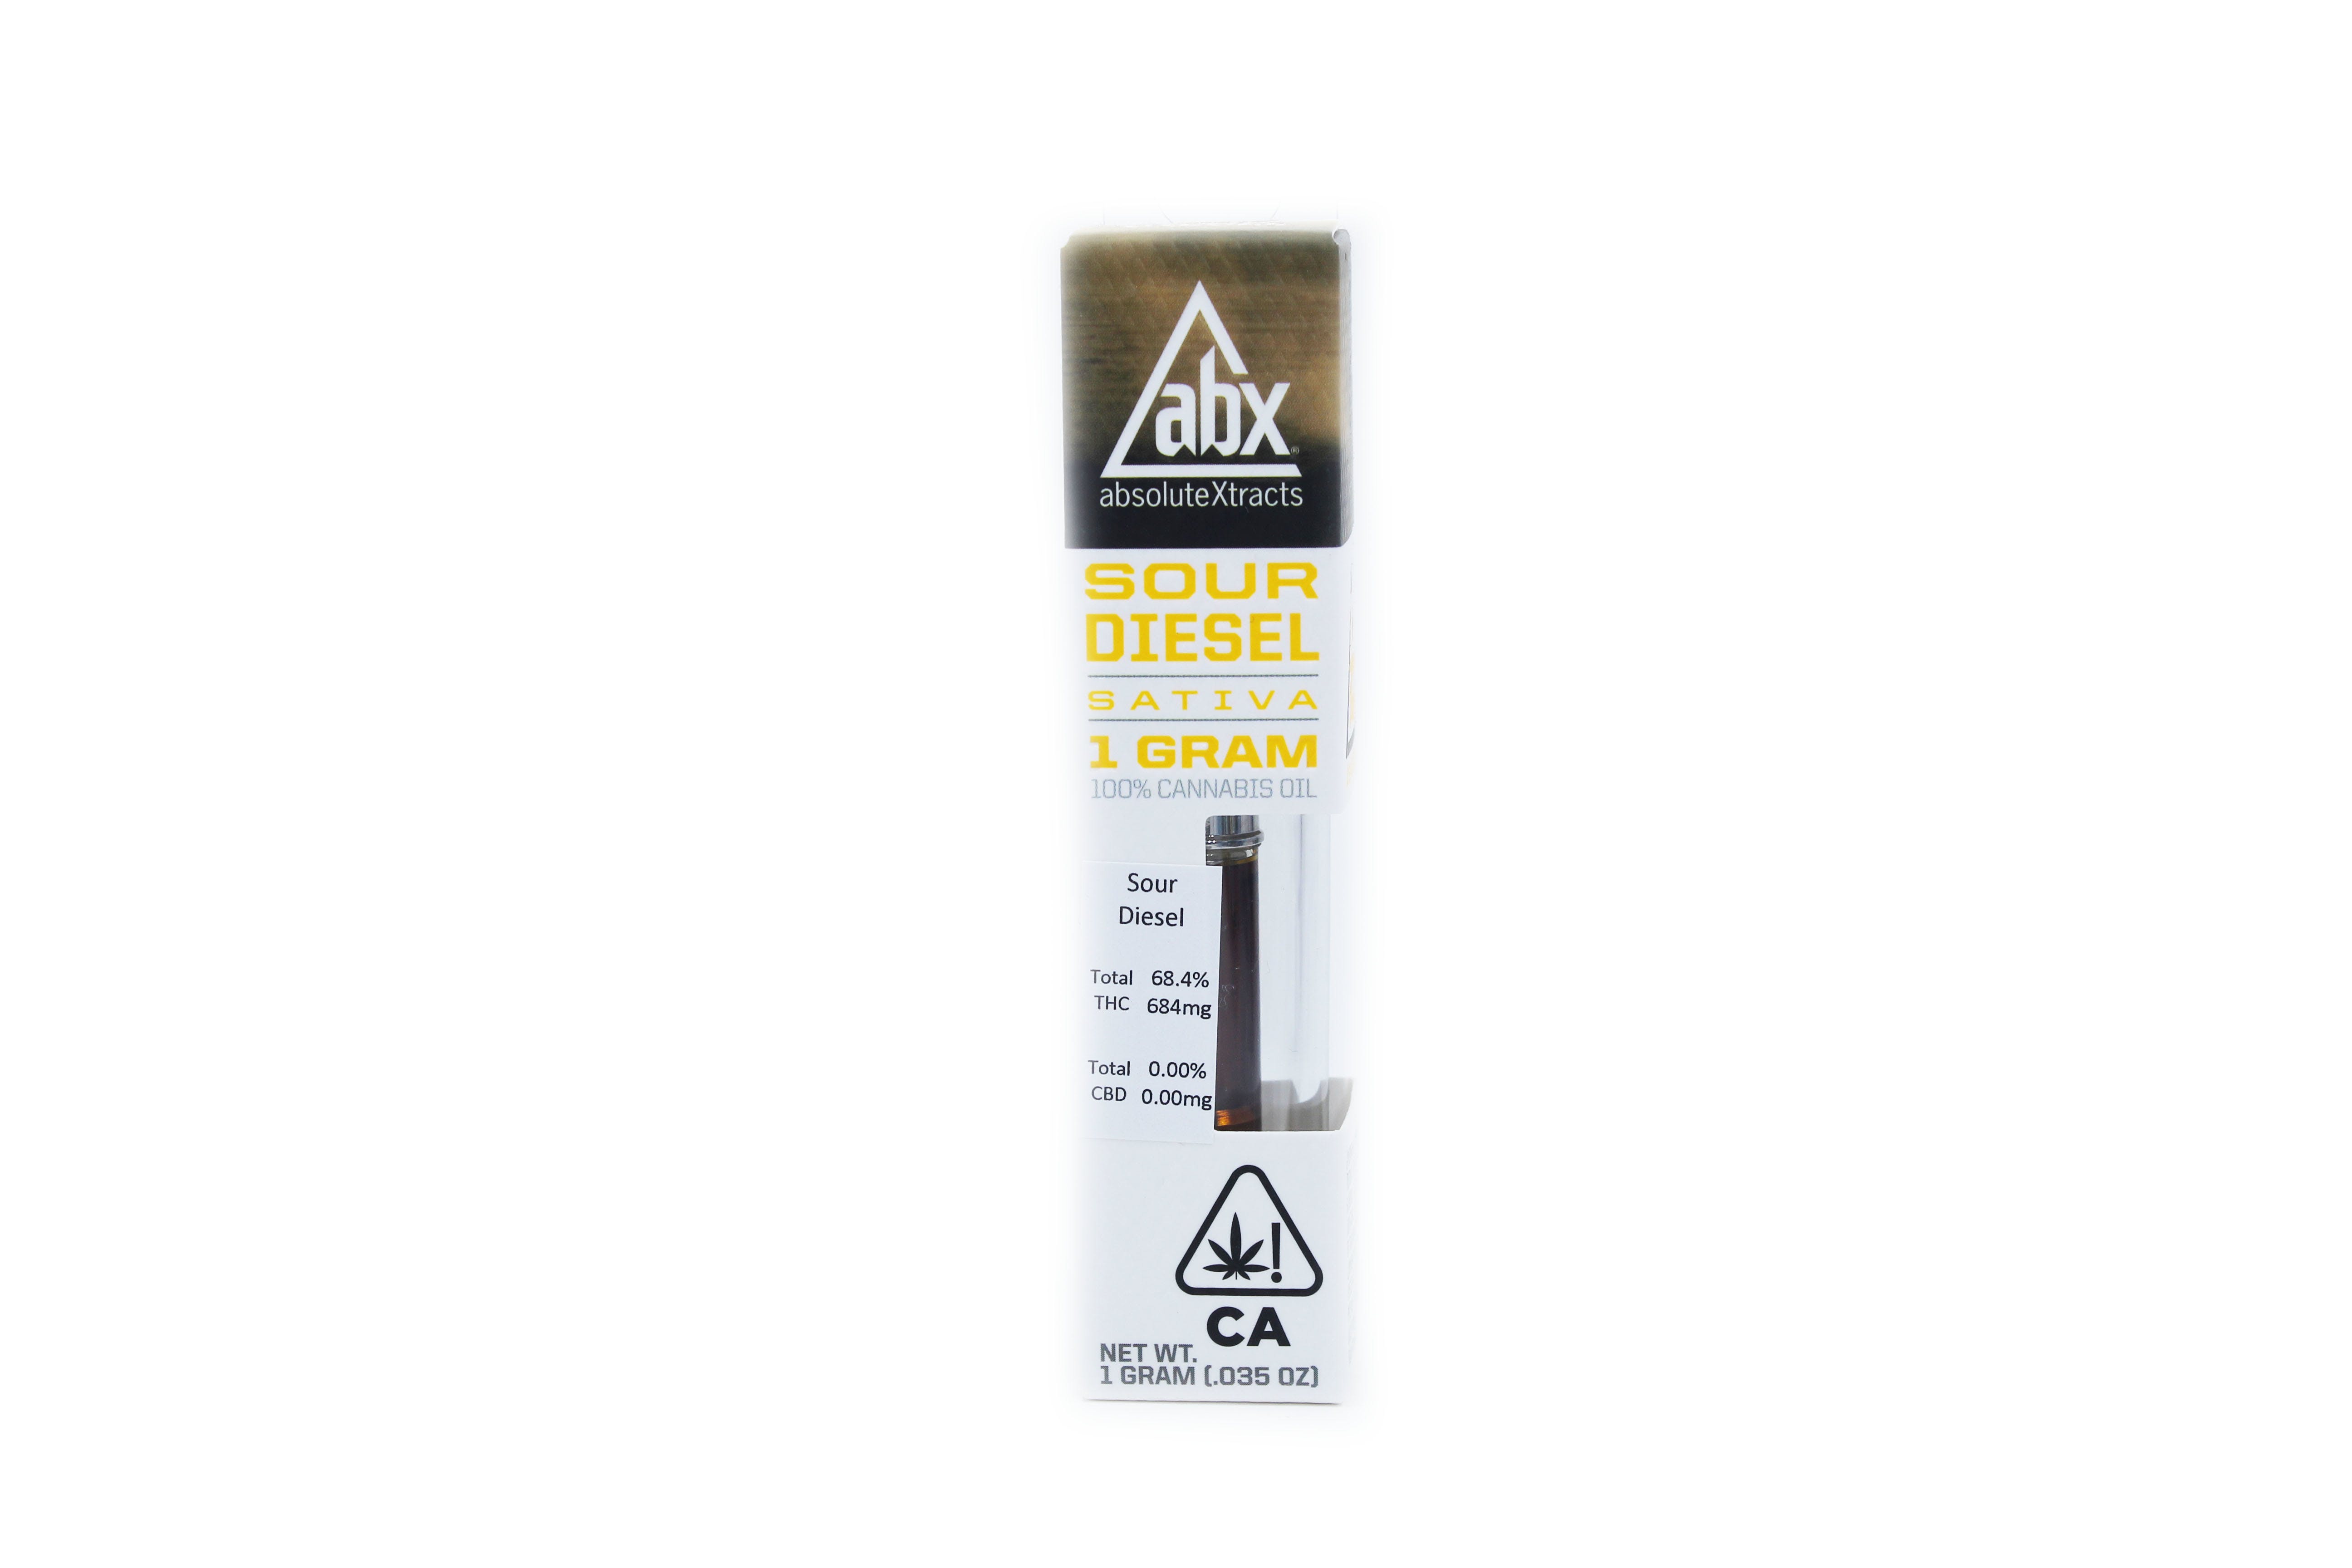 concentrate-absolute-xtracts-sour-diesel-cartridge